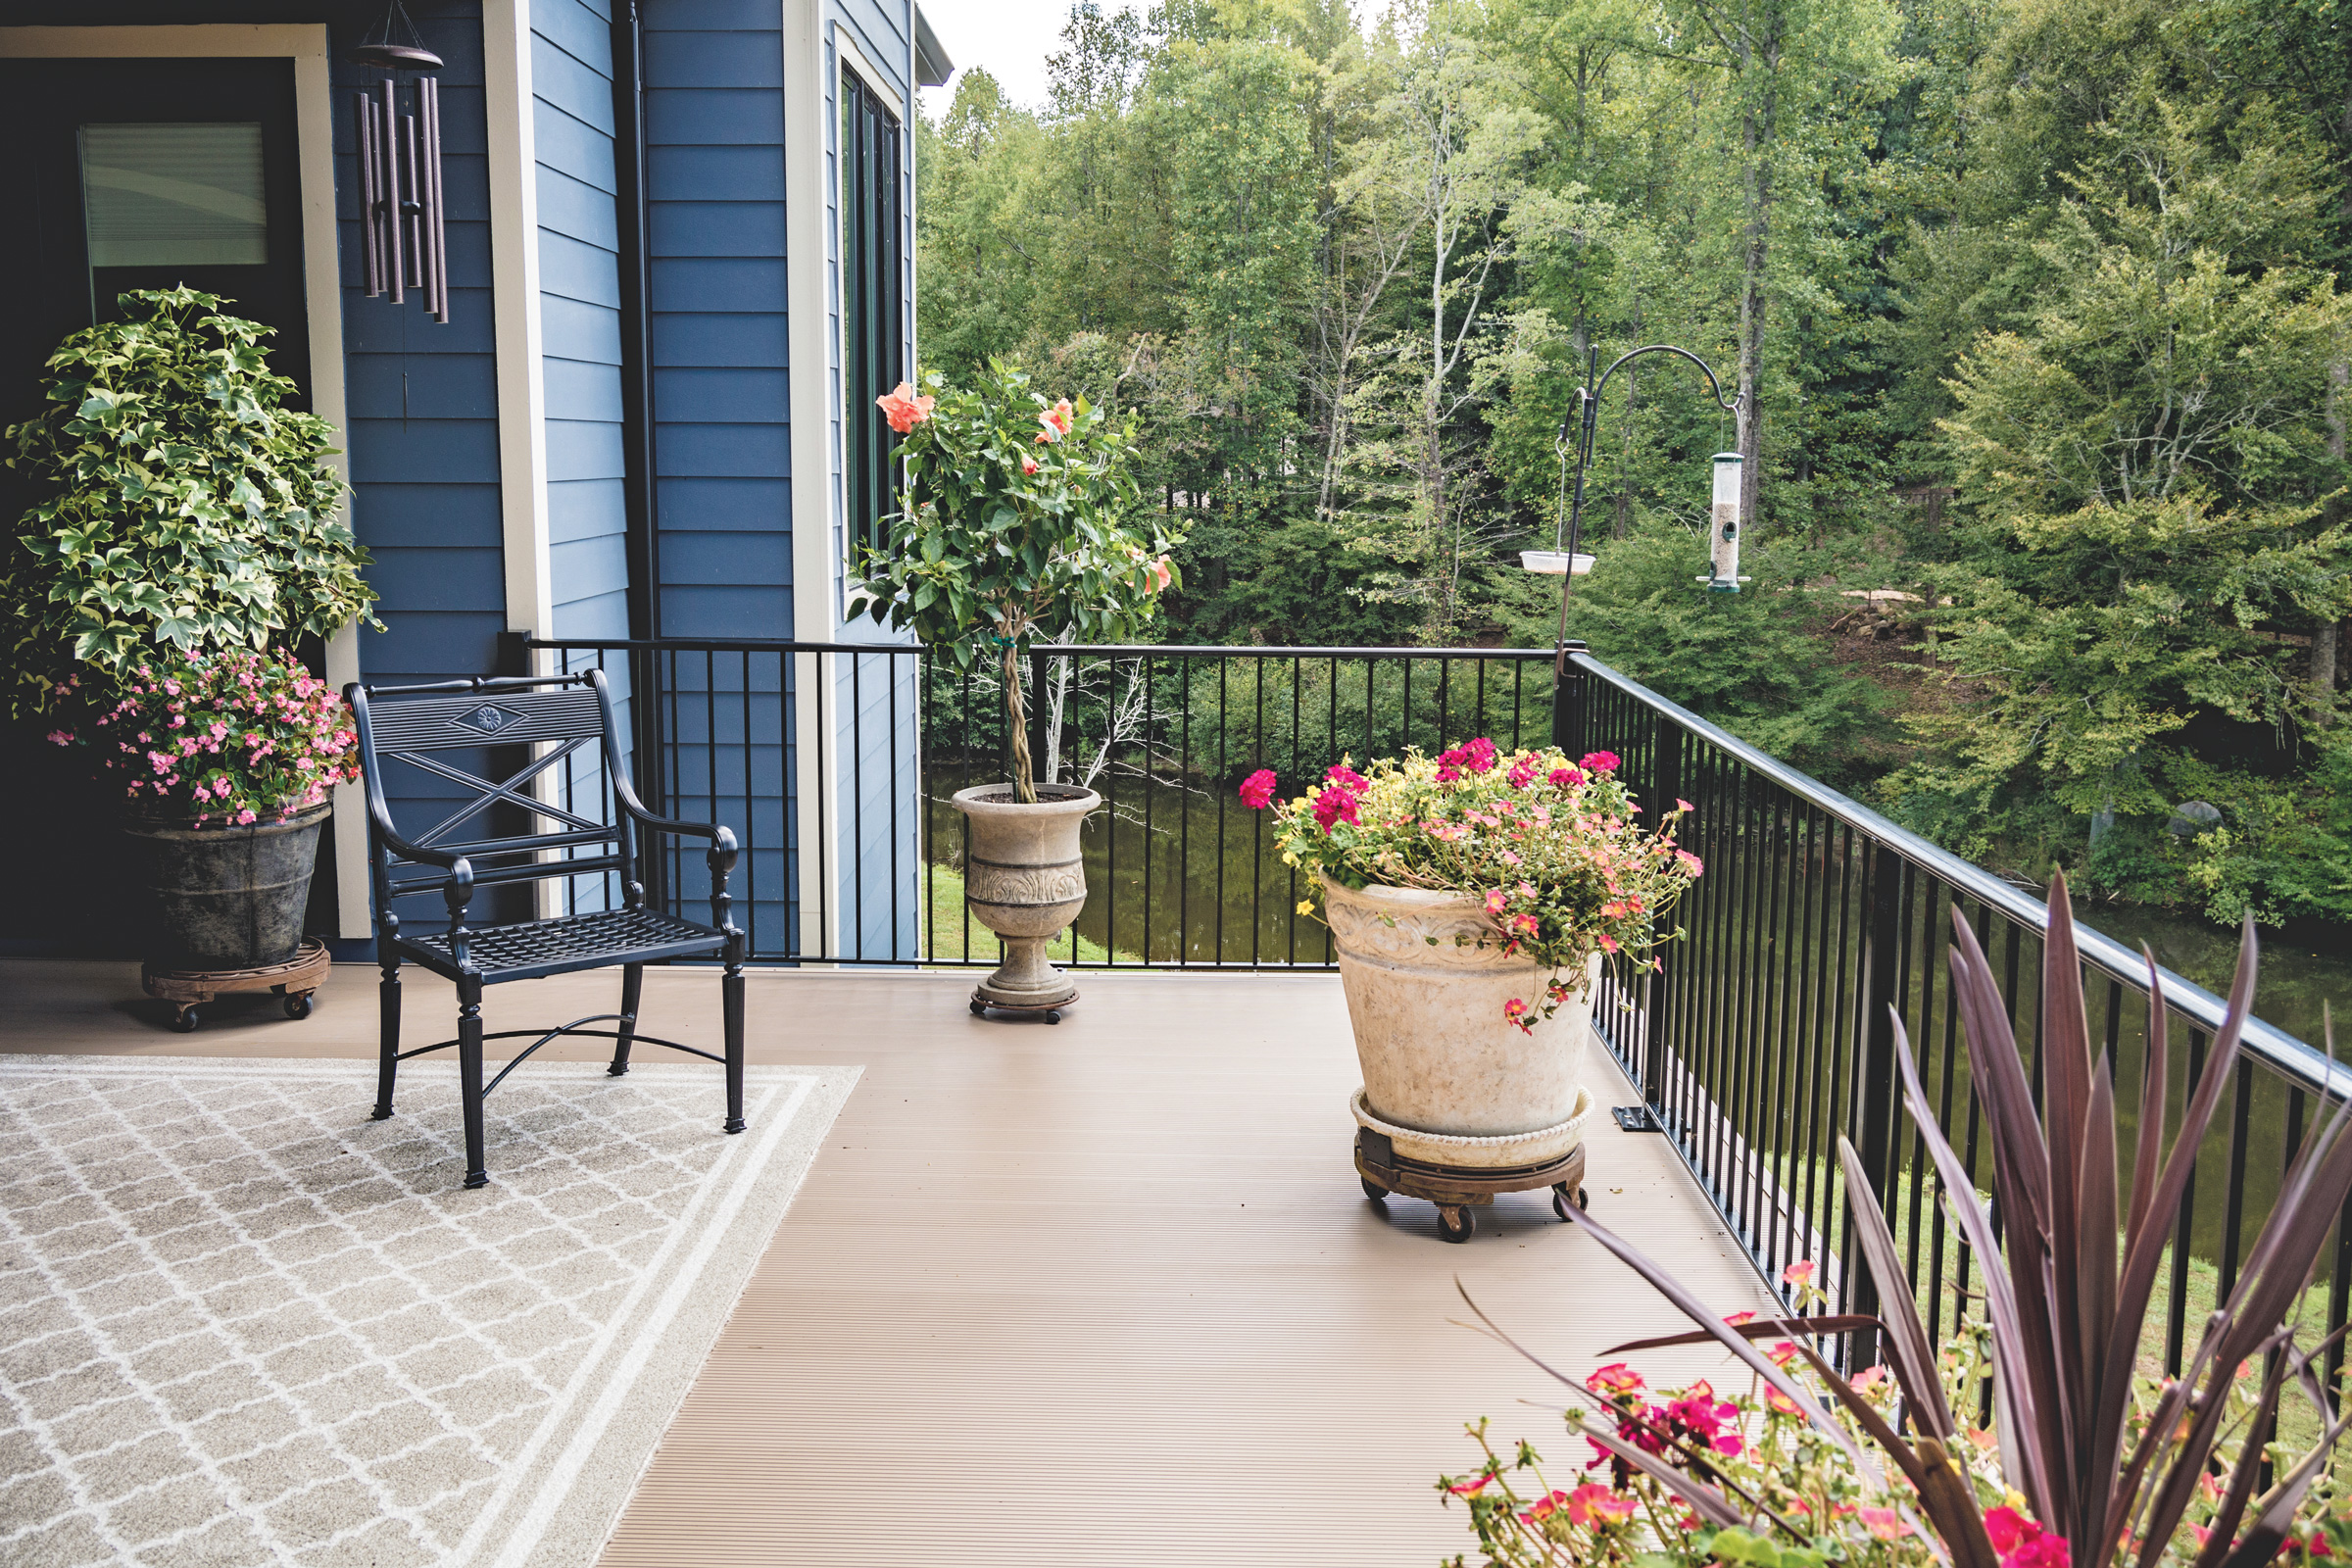 How Aluminum Decking is a More Sustainable, Low-Maintenance Choice